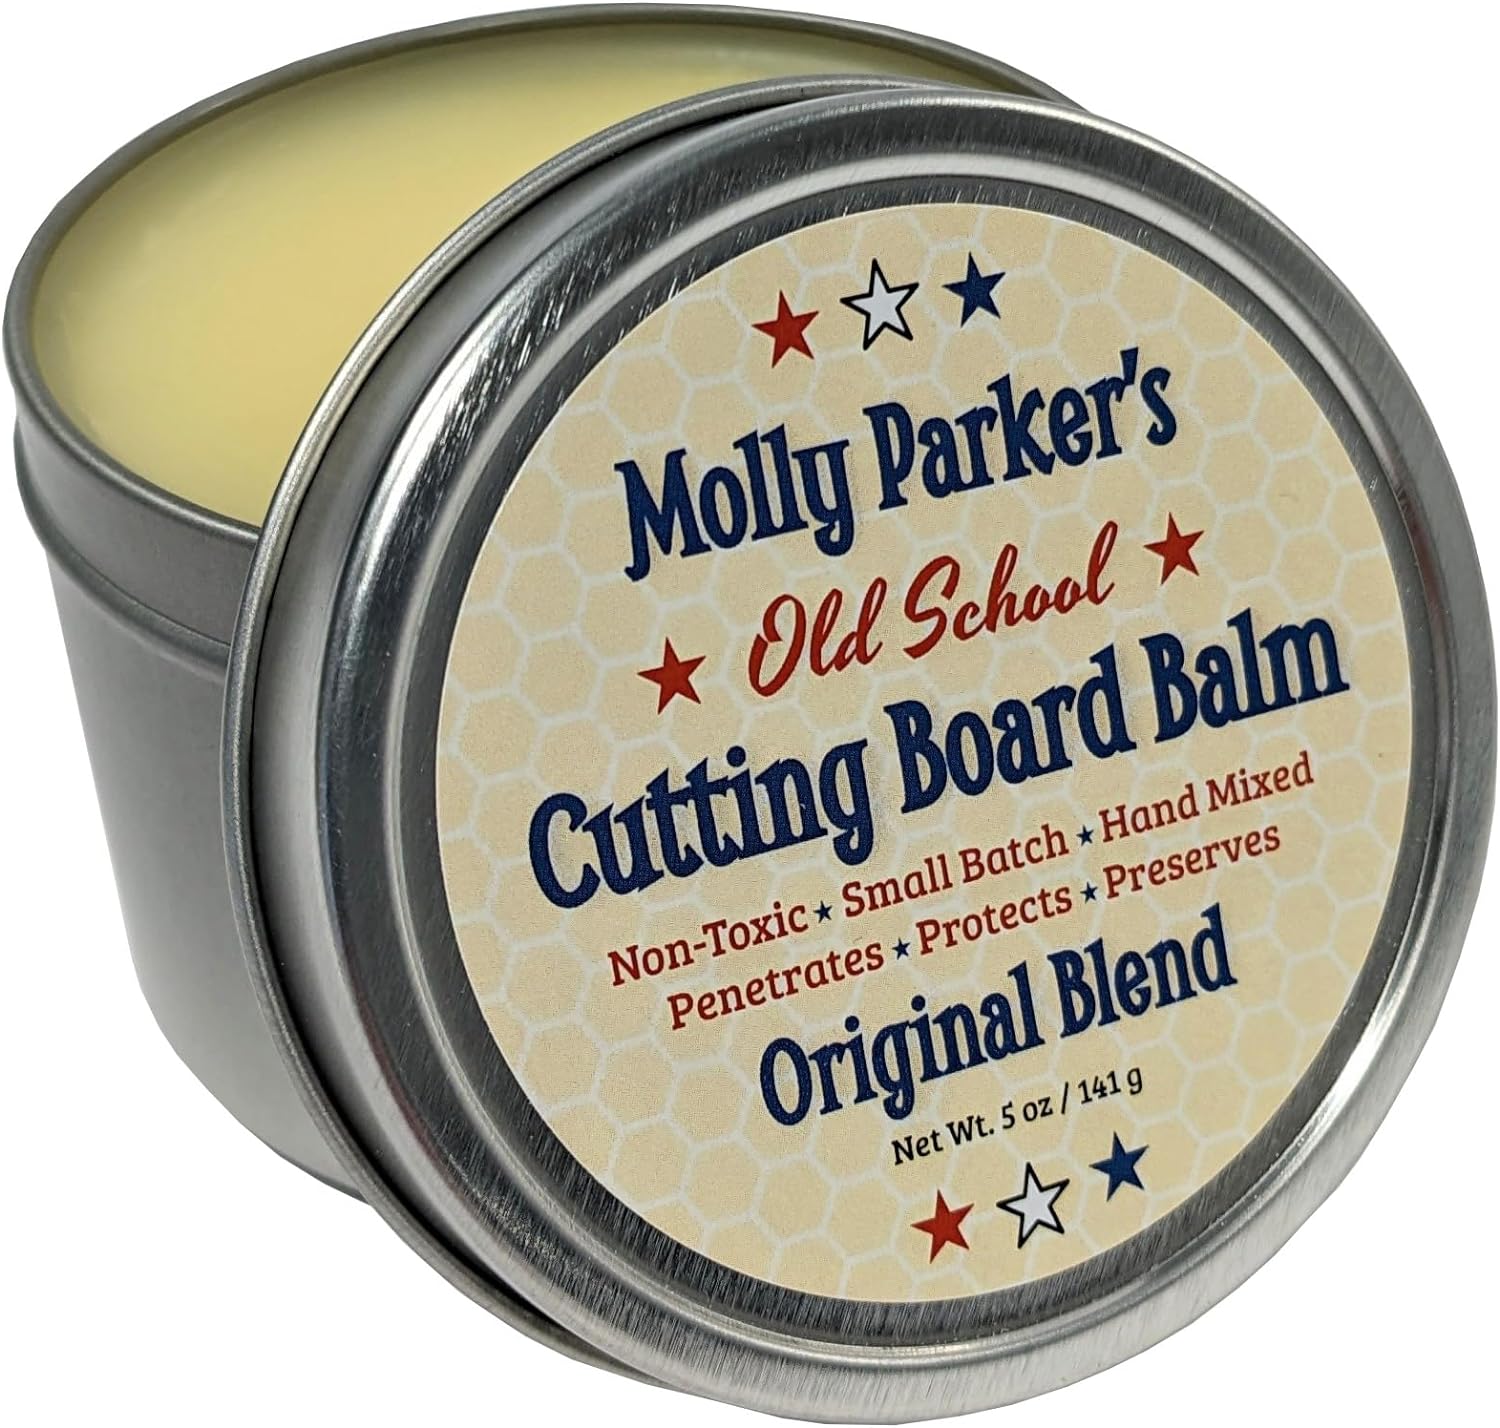 Molly Parker's Old School Cutting Board Balm - Wood Finish - Cutting Board Sealer - Non Toxic - Beeswax - Food Safe - Made in America